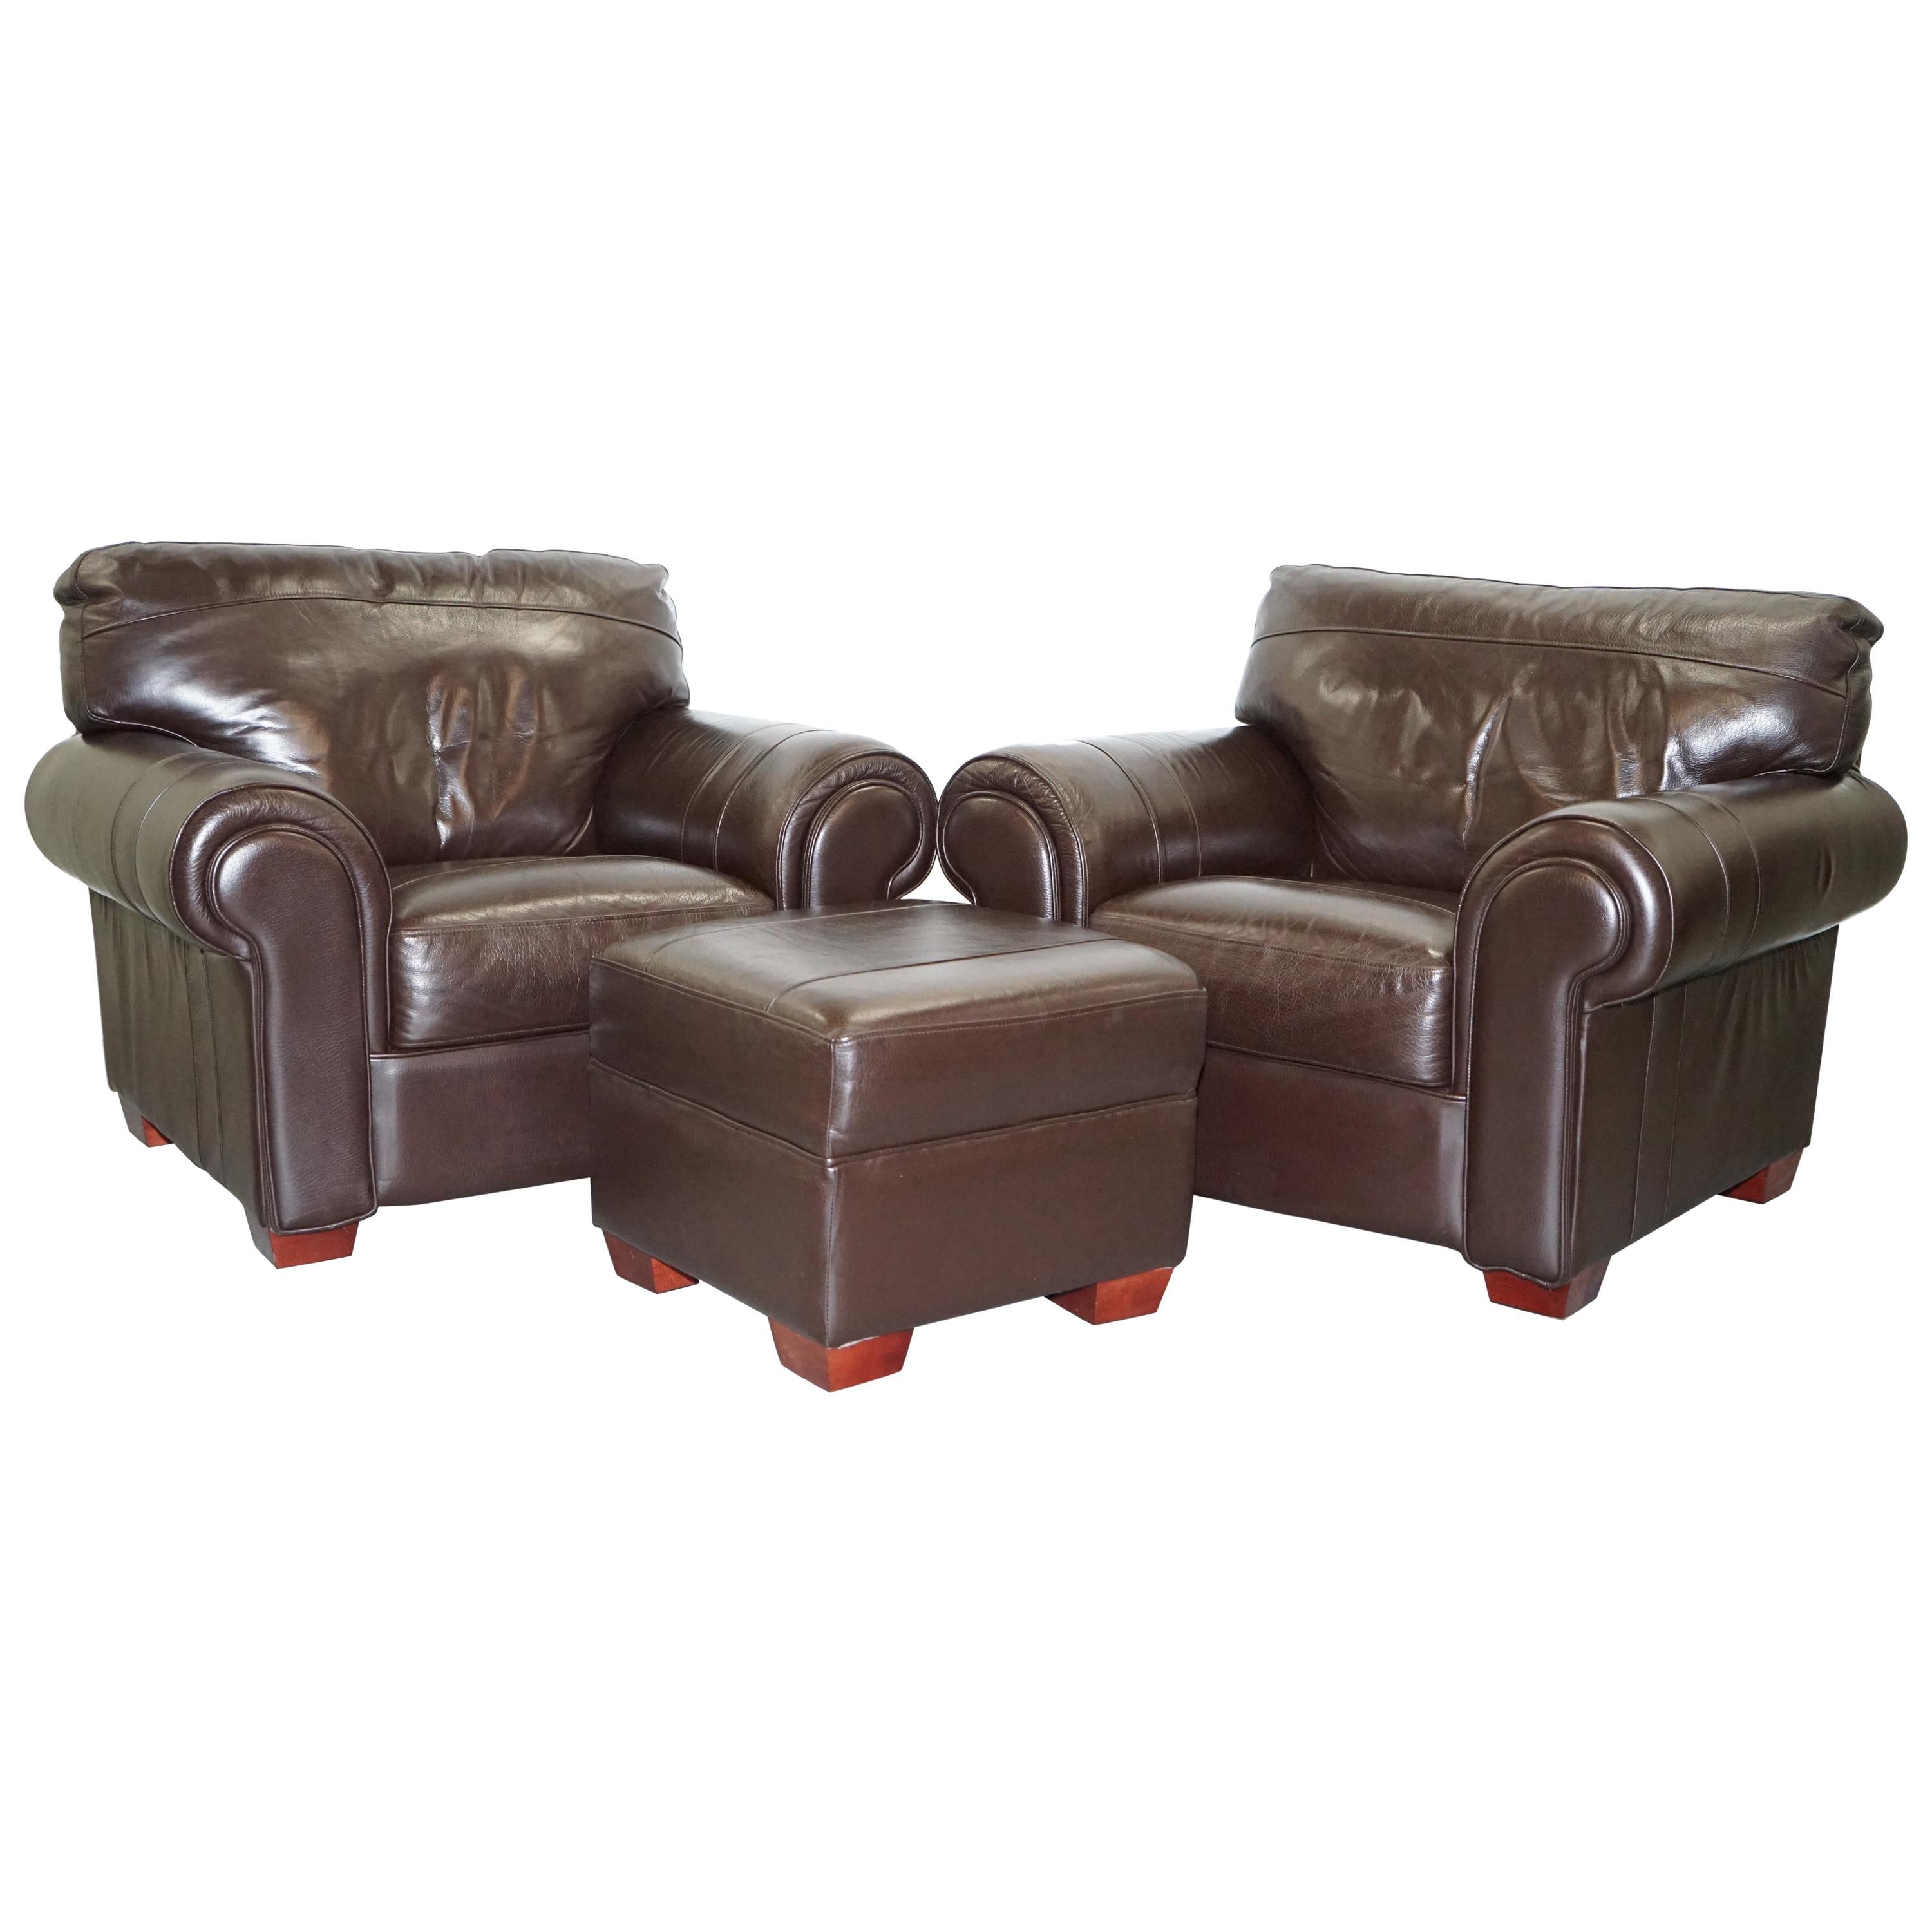 Pair of Large Comfortable Brown Leather Armchairs with Matching Footstool